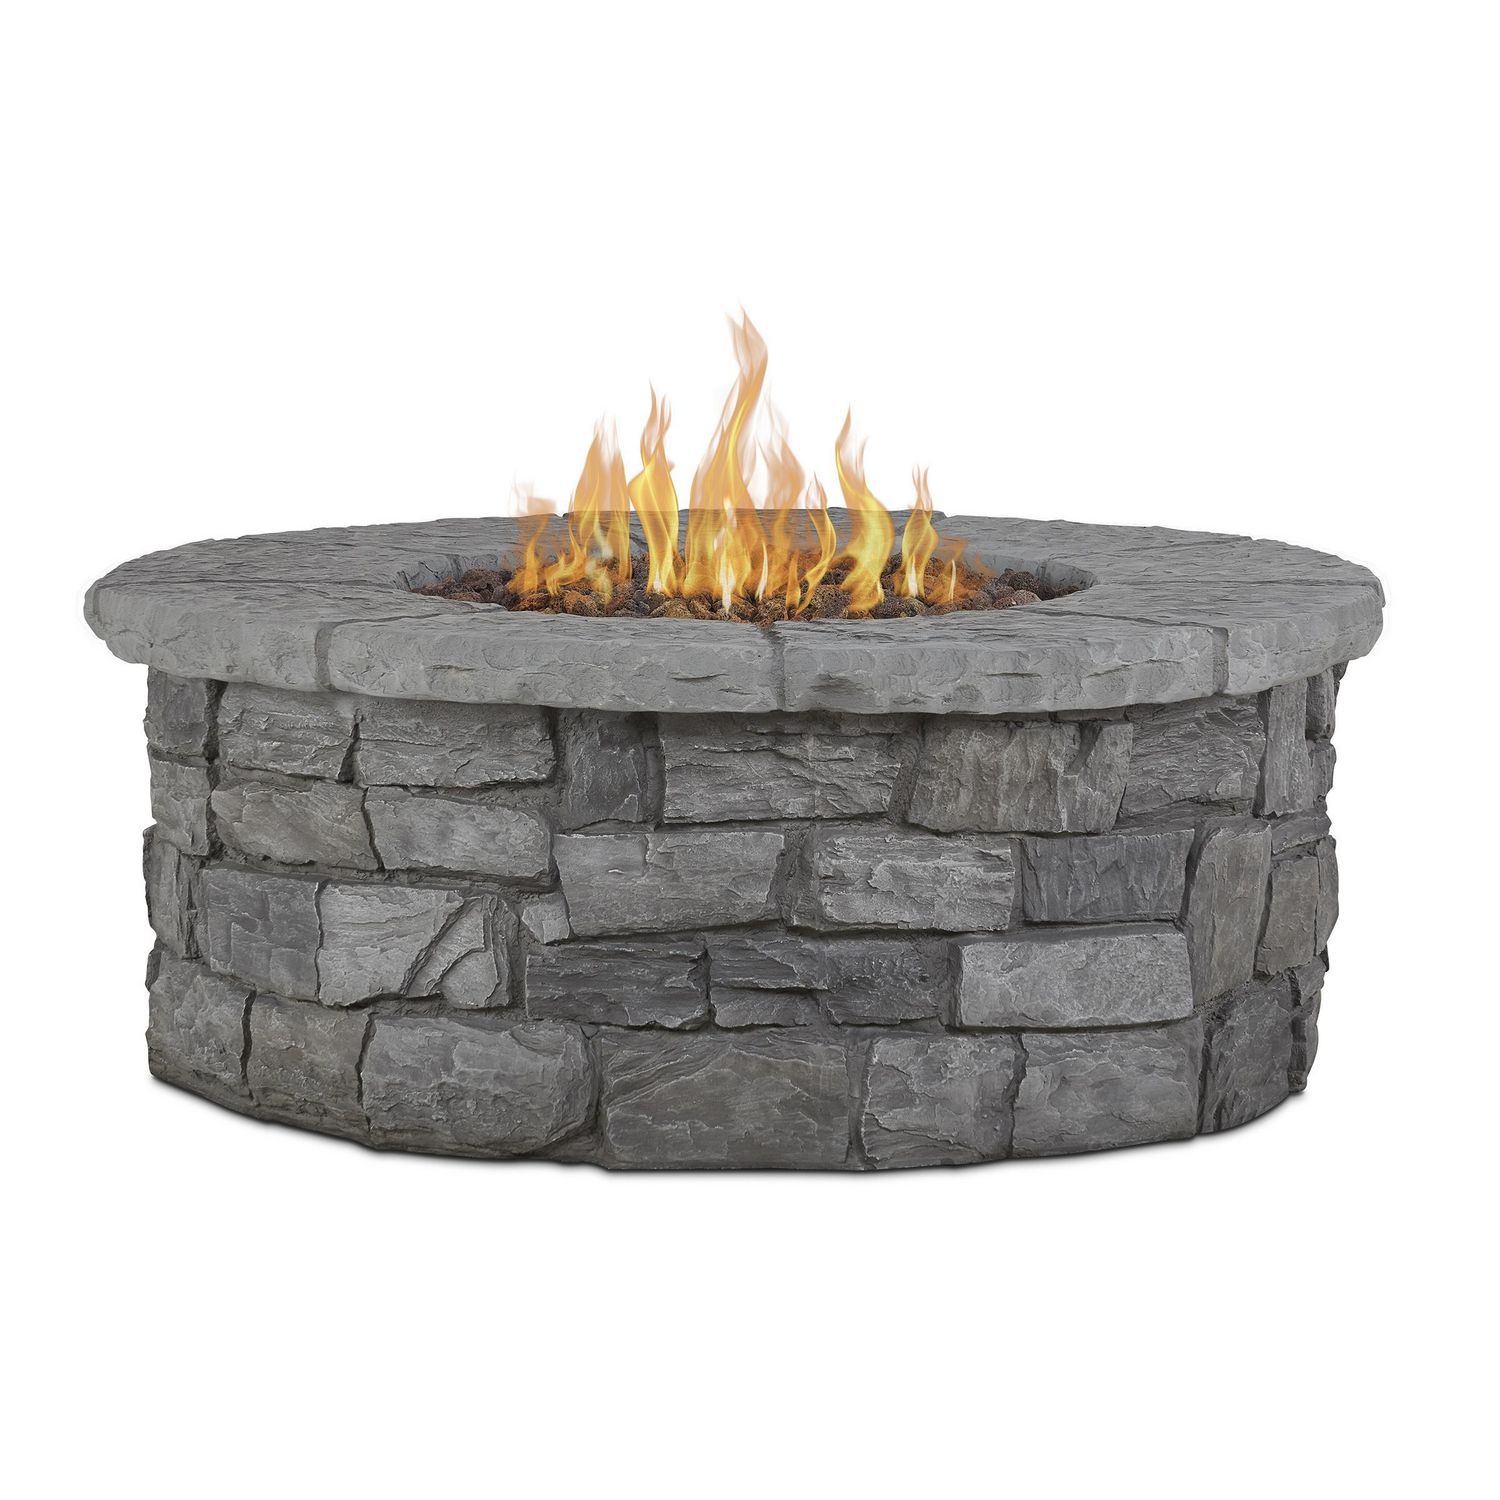 Sedona Round Propane Fire Table In Gray, Convert Natural Gas Fire Pit To Propane